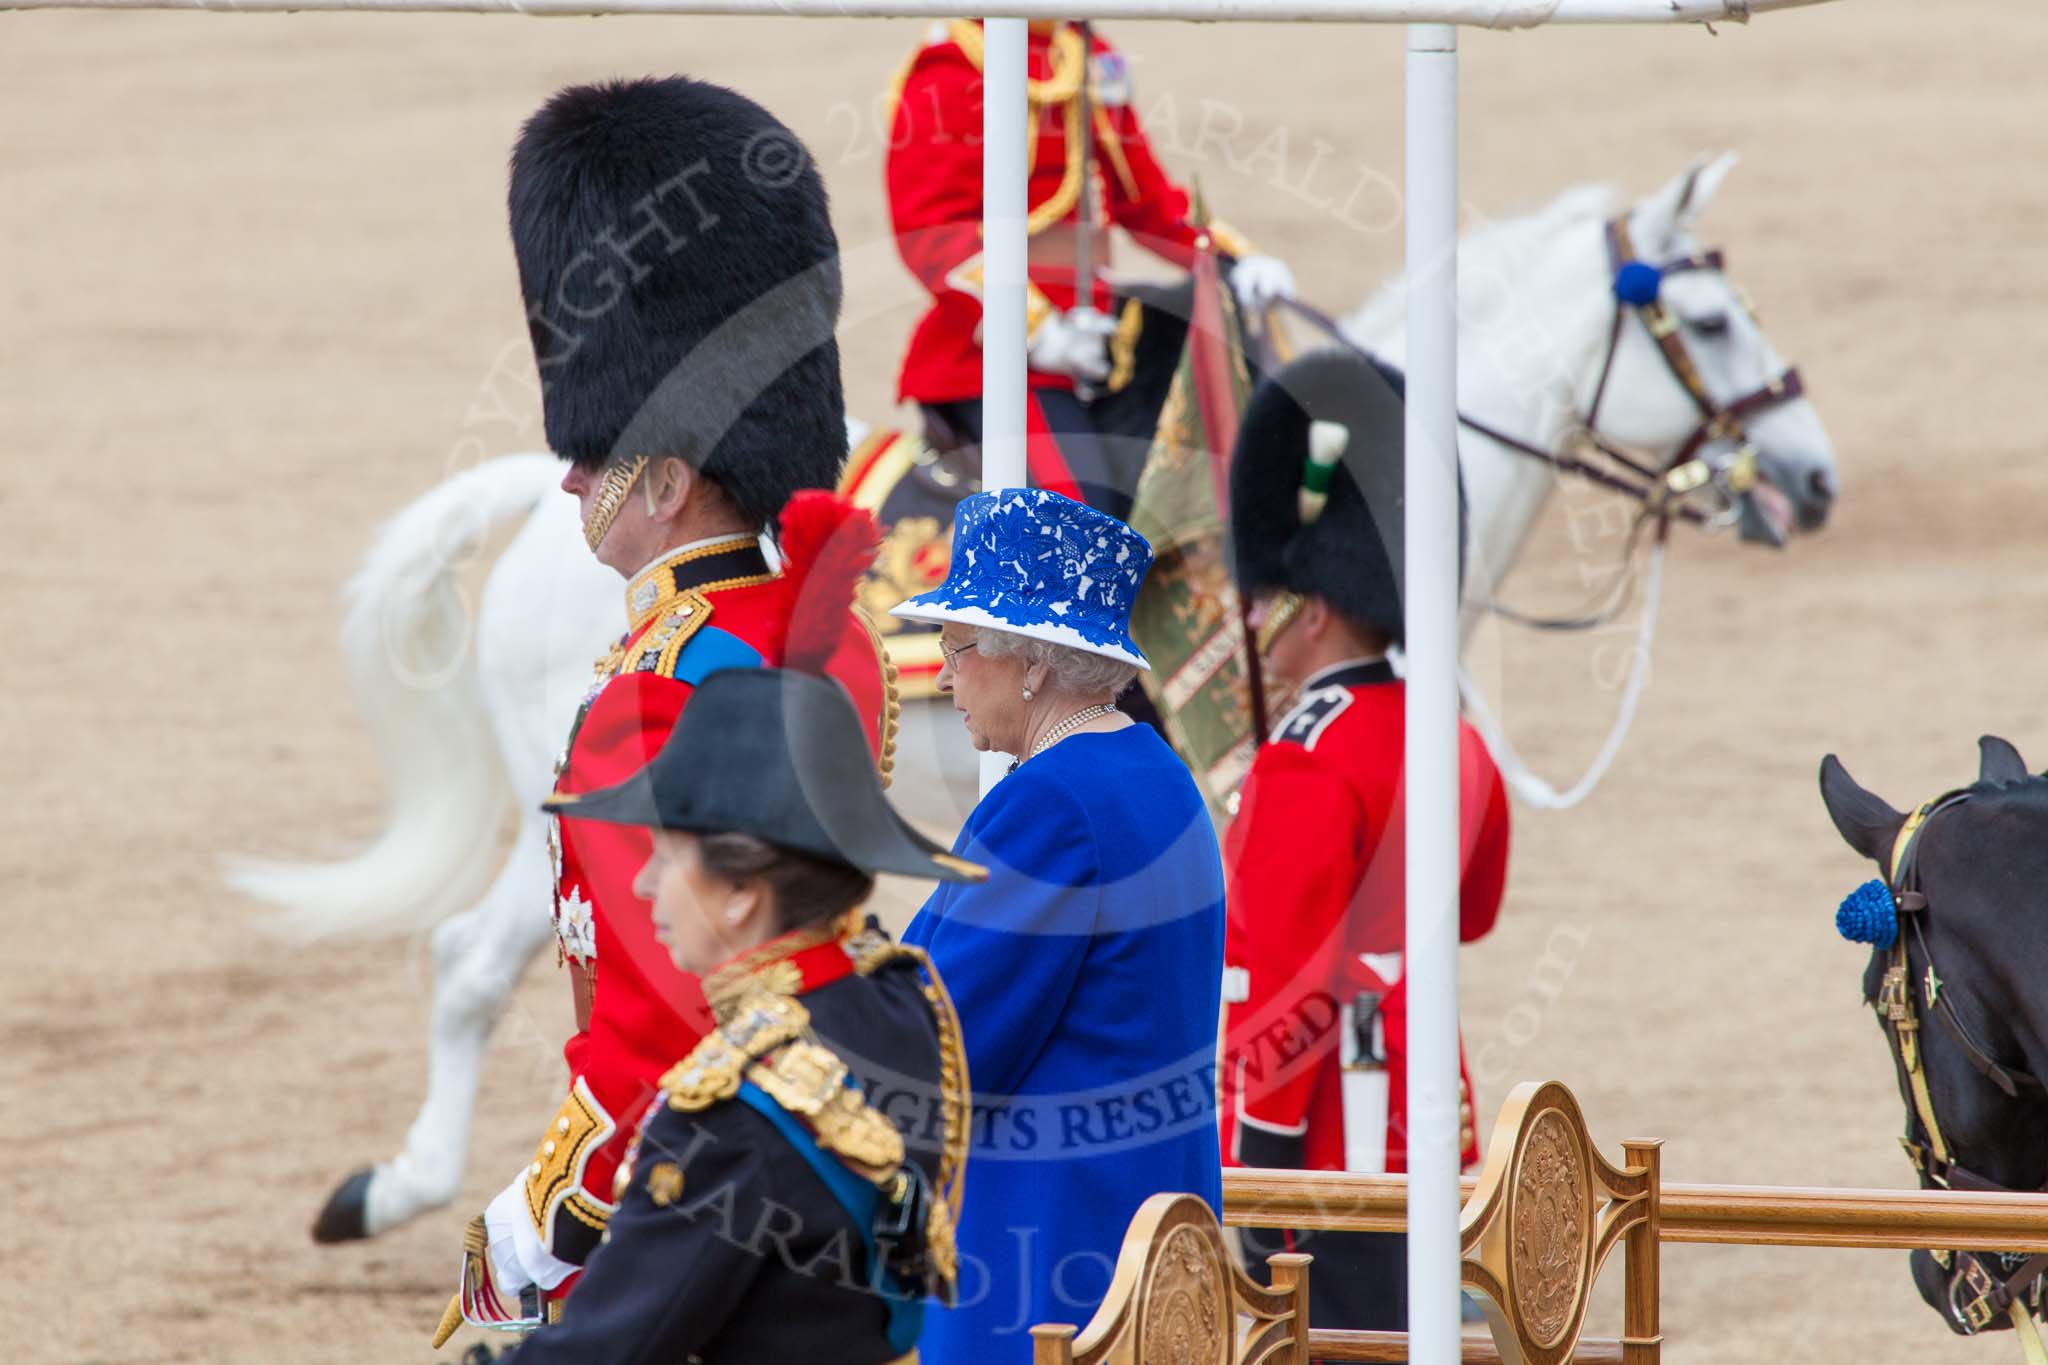 Trooping the Colour 2013: HRH The Duke of Kent and HM The Queen are standing on the dais during the March Past. Image #604, 15 June 2013 11:45 Horse Guards Parade, London, UK